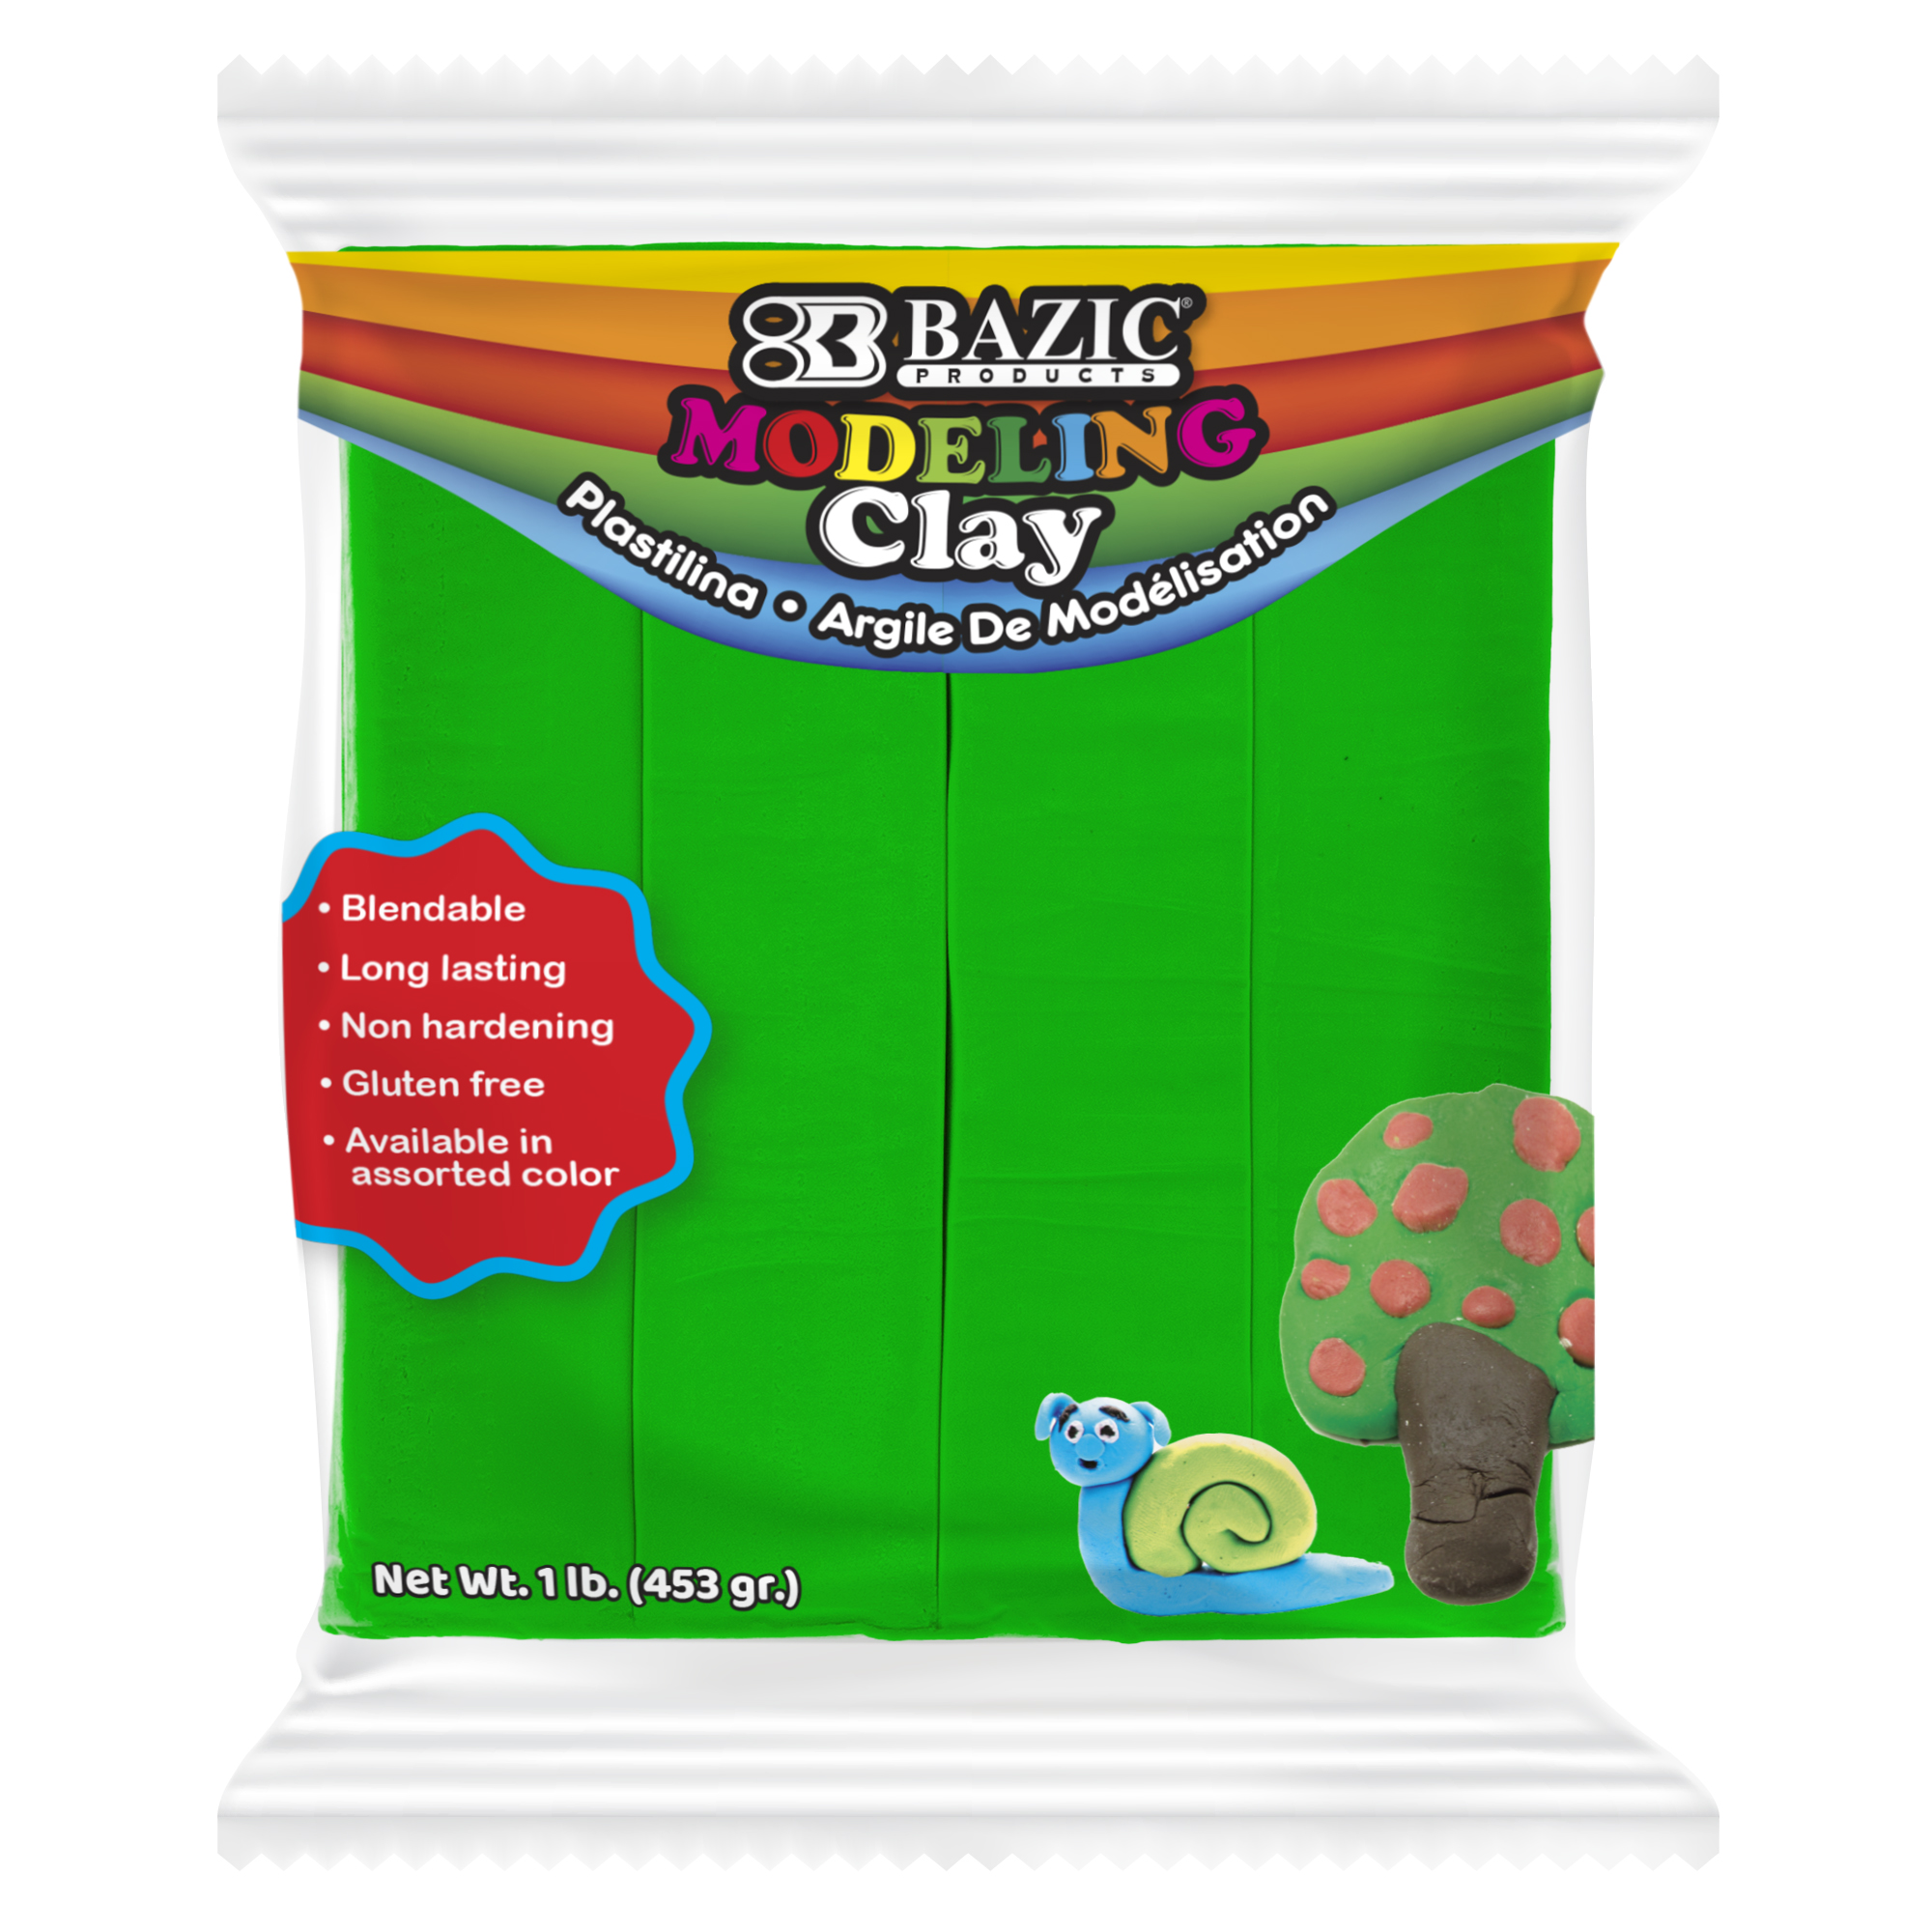 BAZIC Modeling Clay 4 Primary Color 1LB, Non Toxic, Bulk for